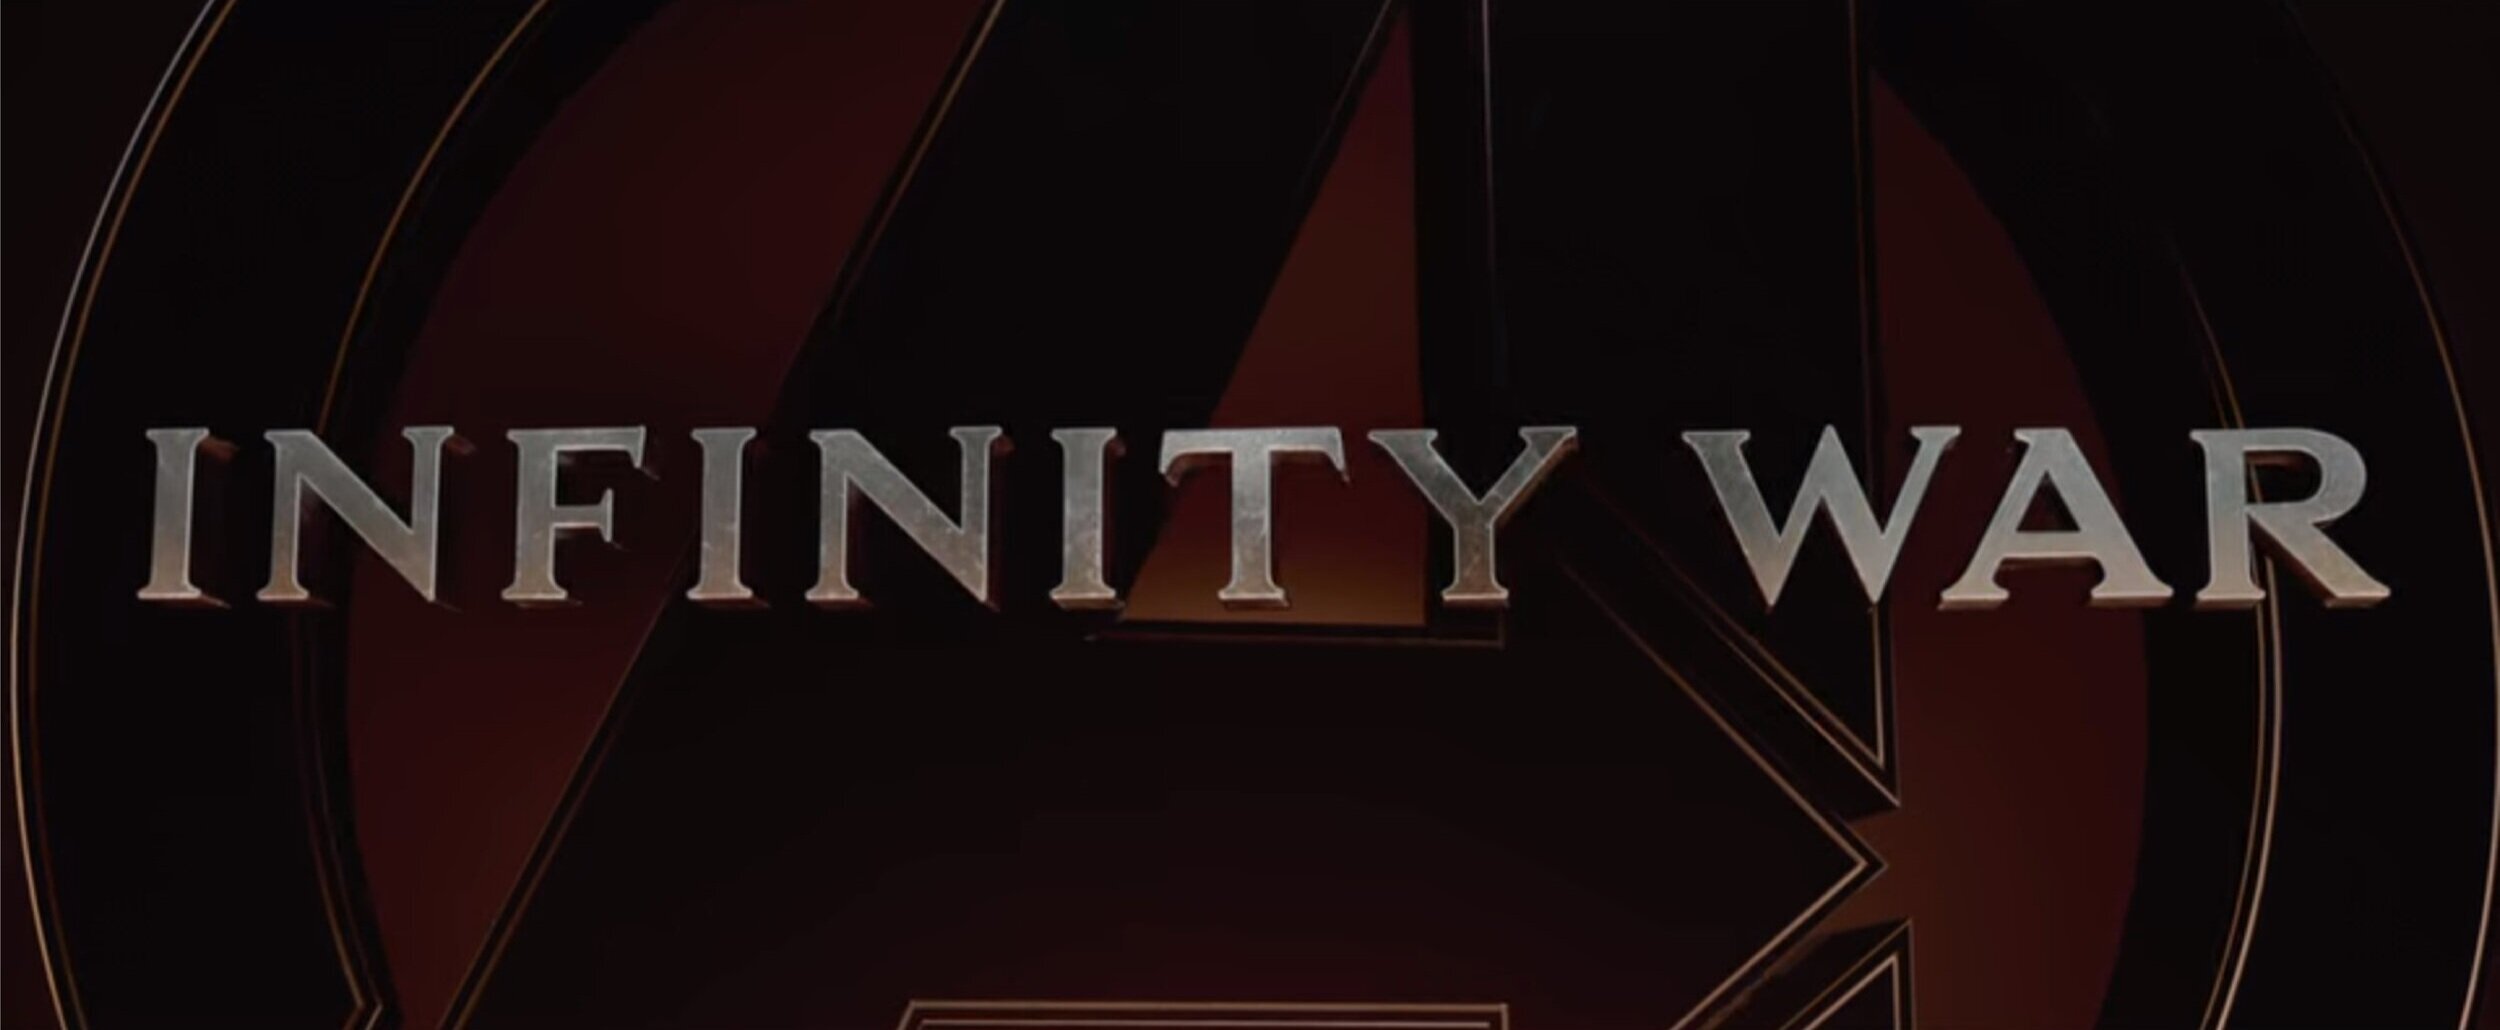 Avengers: Endgame Was Titled Differently & So Was 'Infinity War